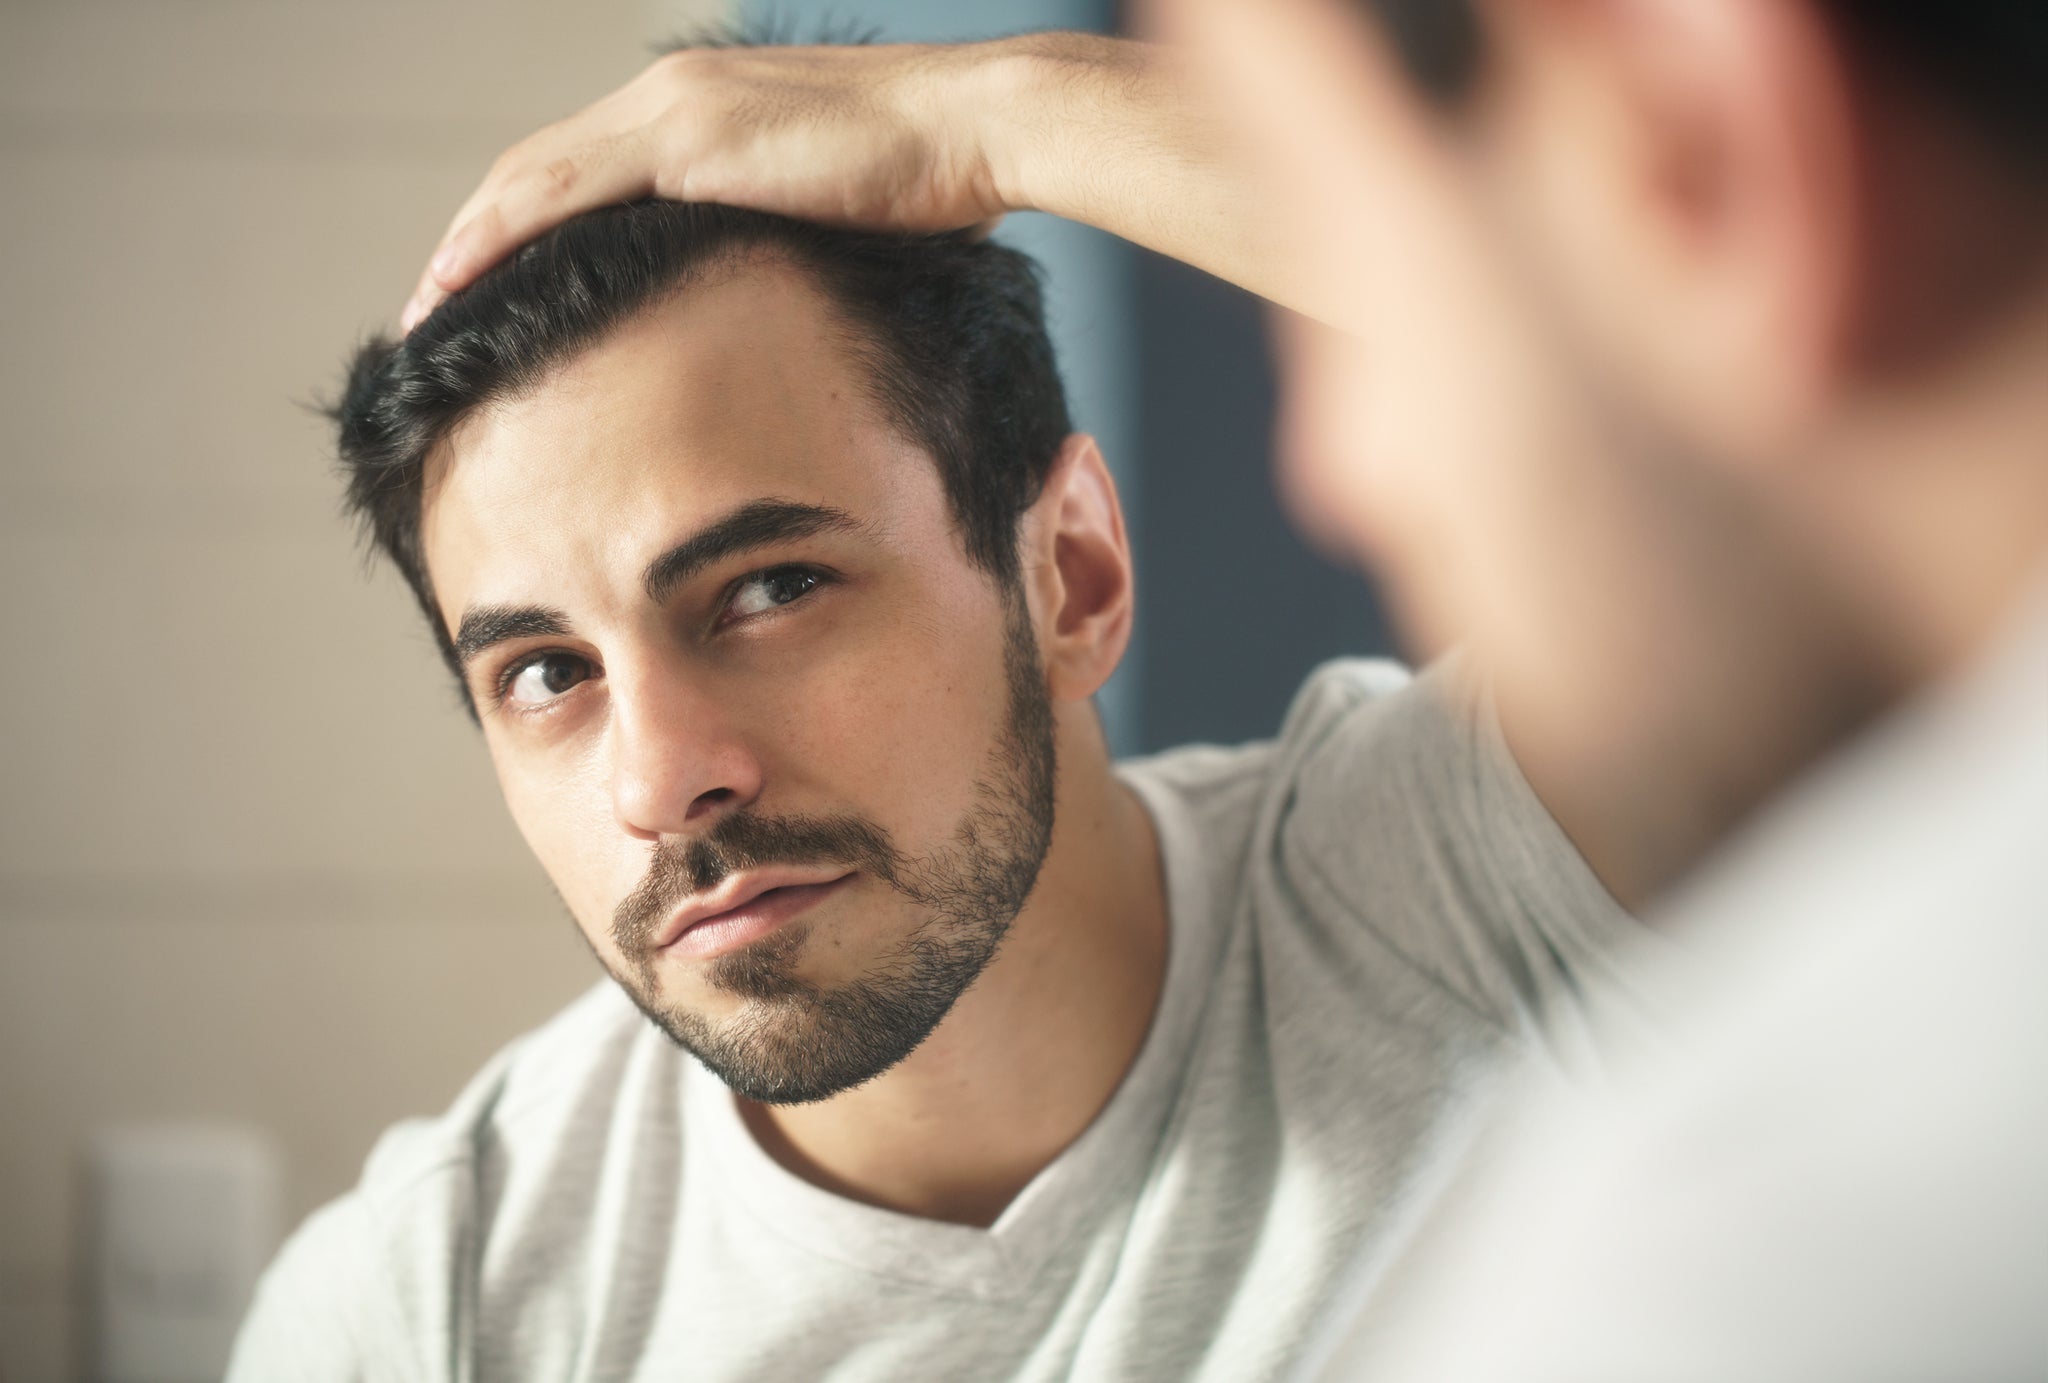 Habits that can lead to premature baldness in men